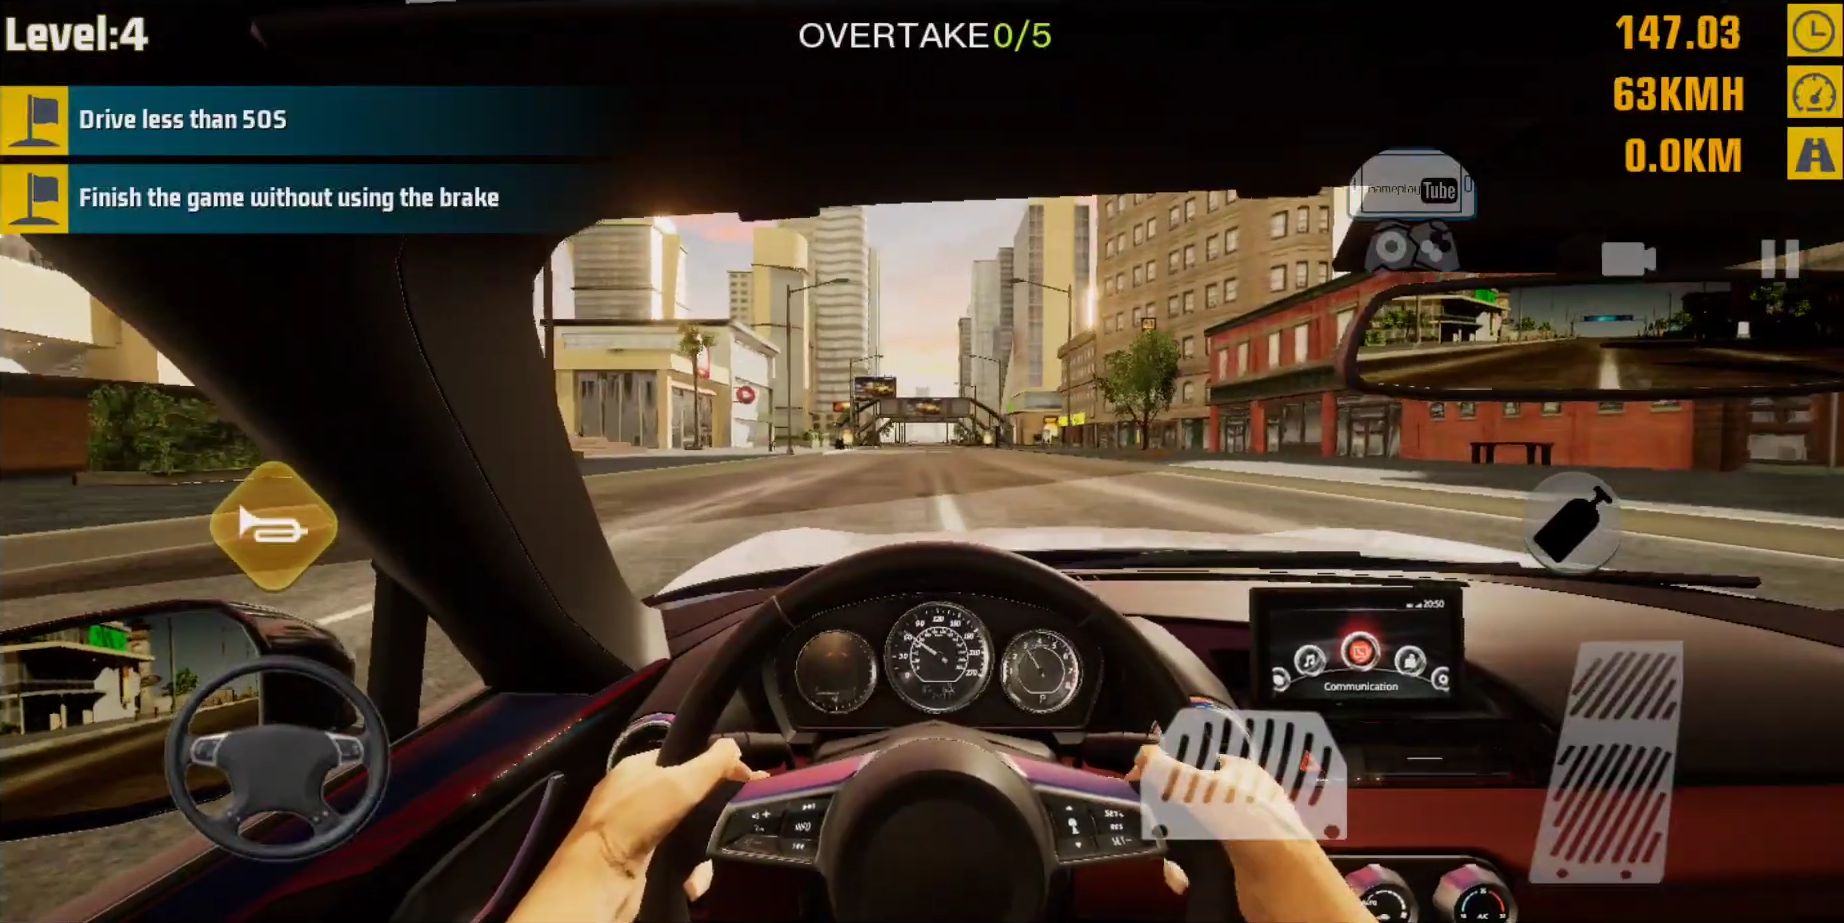 Real Driving 2: Ultimate Car Simulator finally arrives on Android